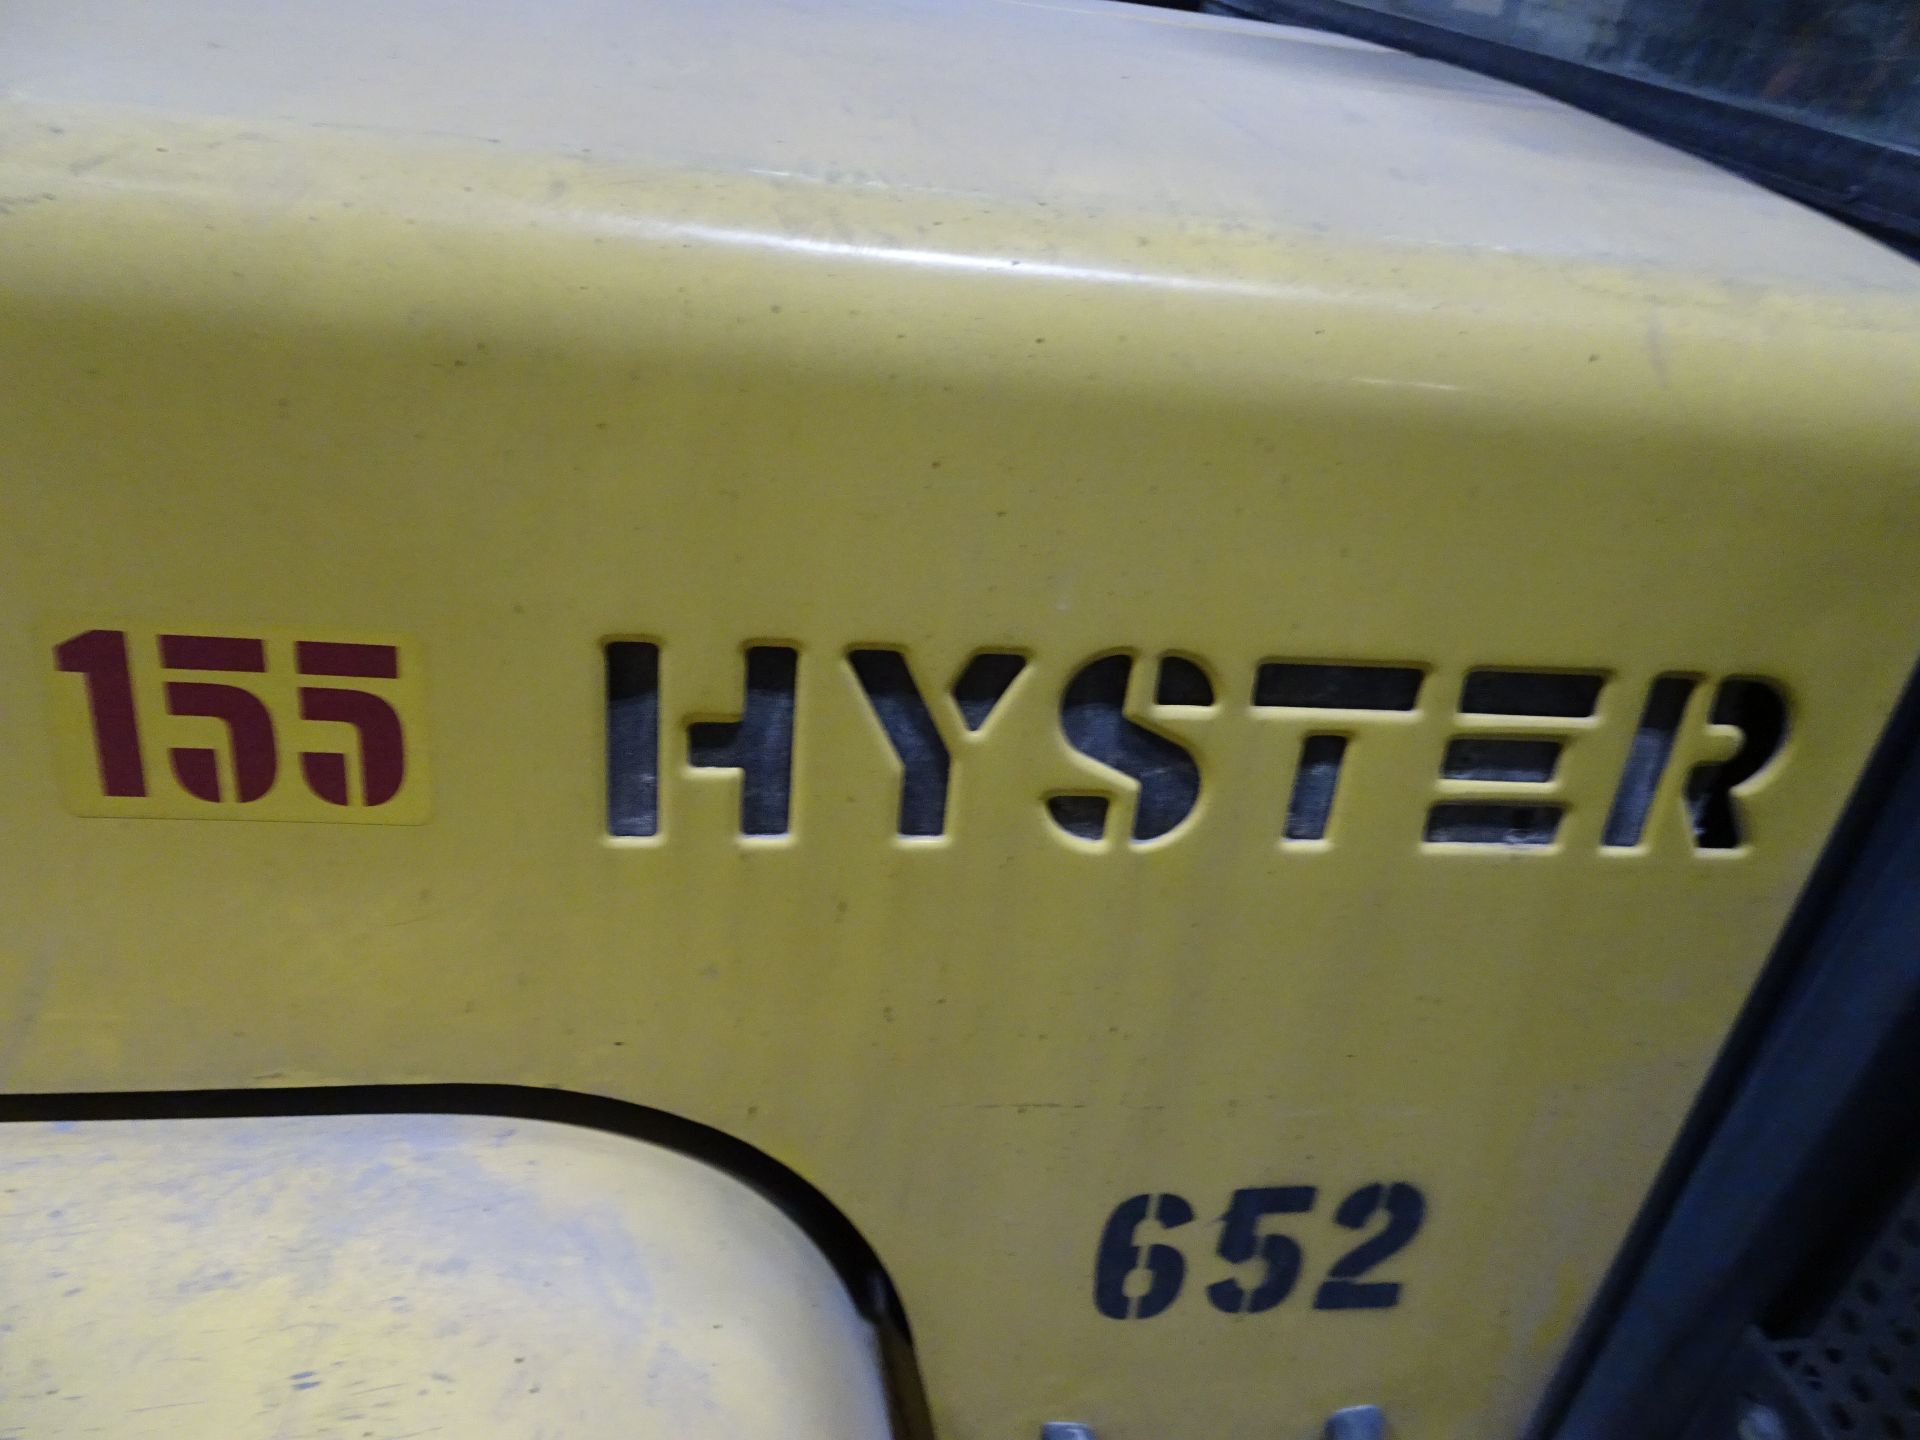 1999 Hyster iesel Forklift - Image 2 of 4